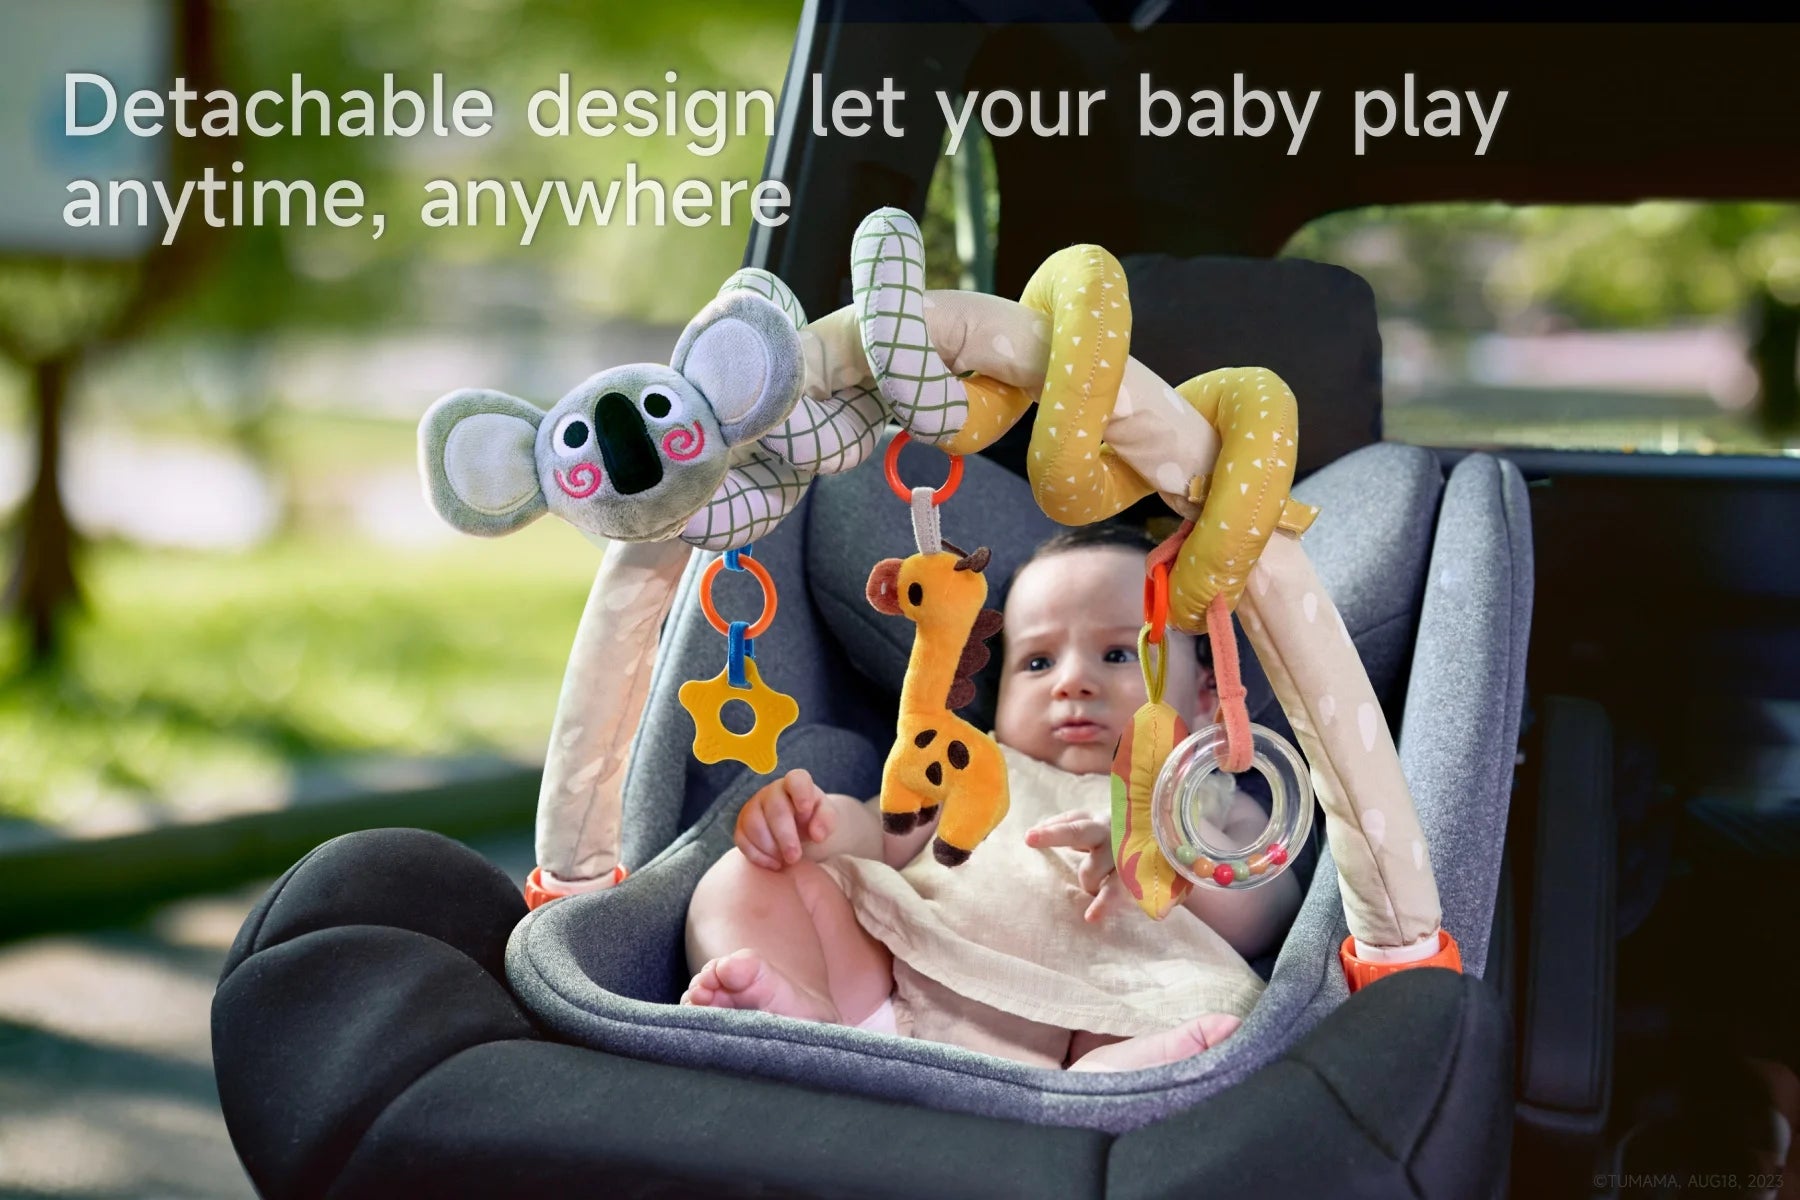 A baby playing with an arch toy in a car